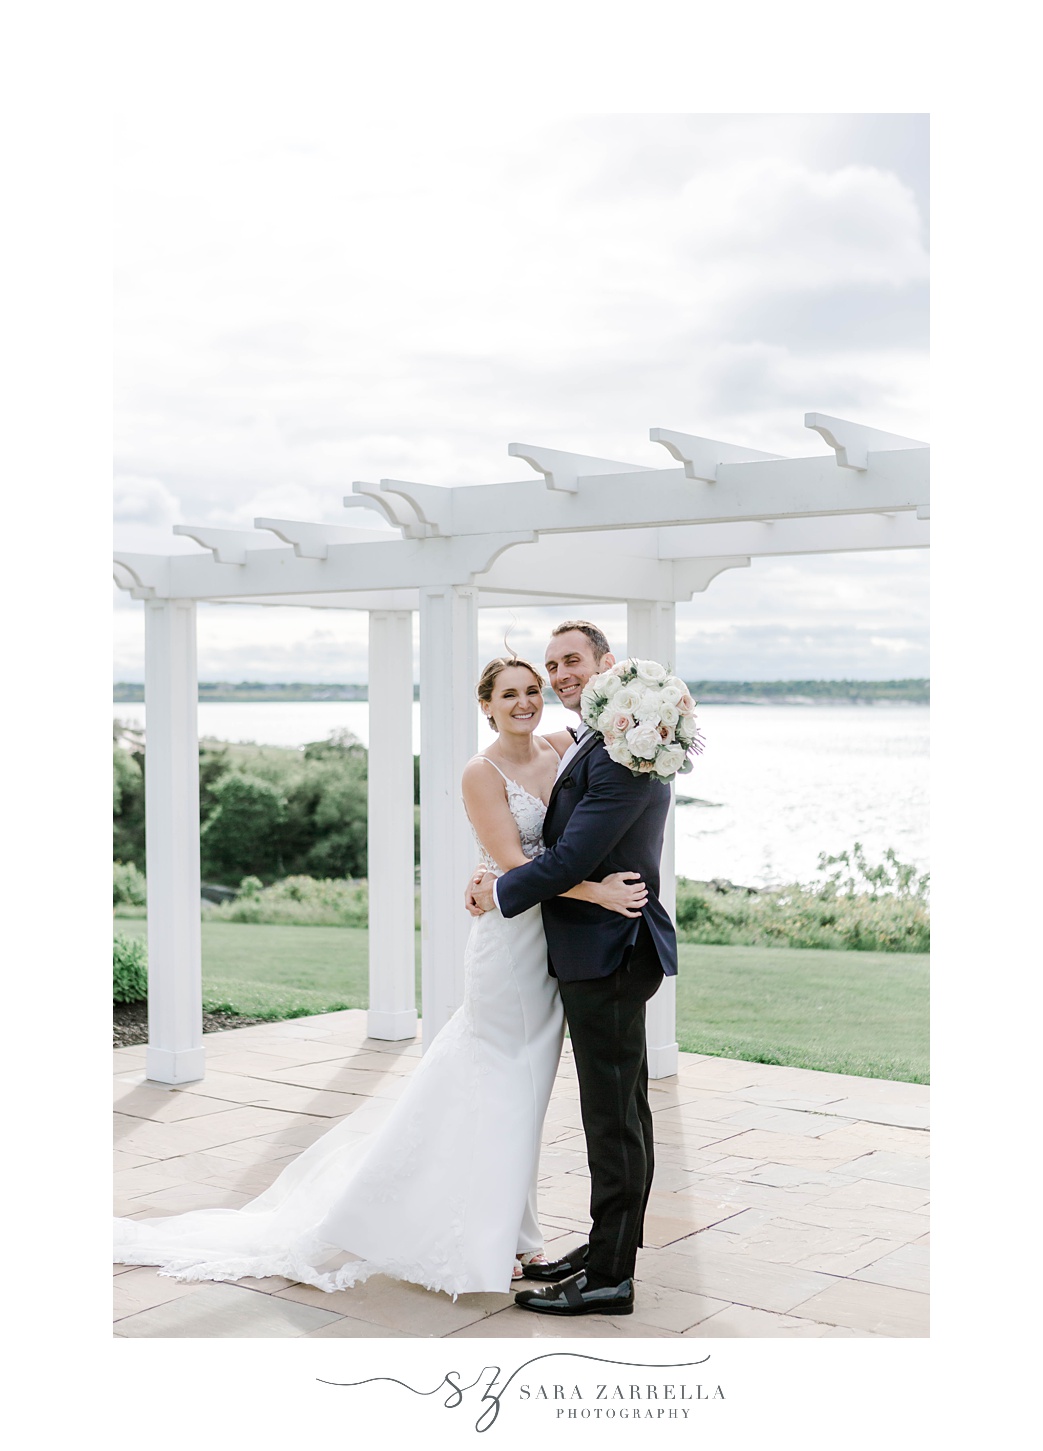 newlyweds hug during portraits at OceanCliff Hotel in front of white arbor